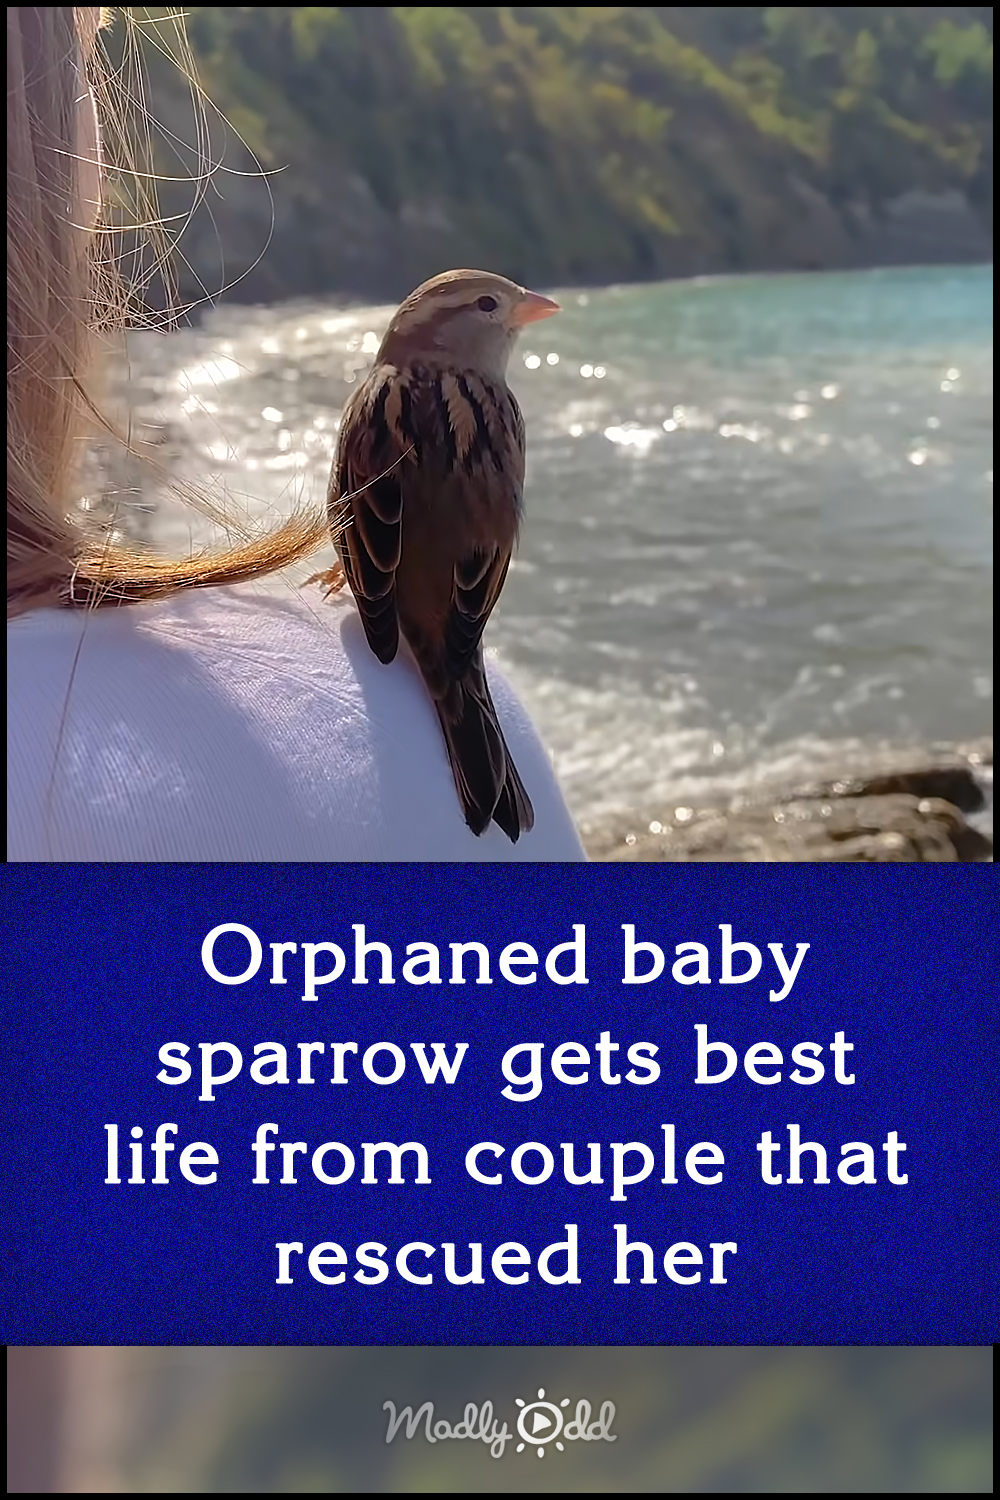 Orphaned baby sparrow gets best life from couple that rescued her